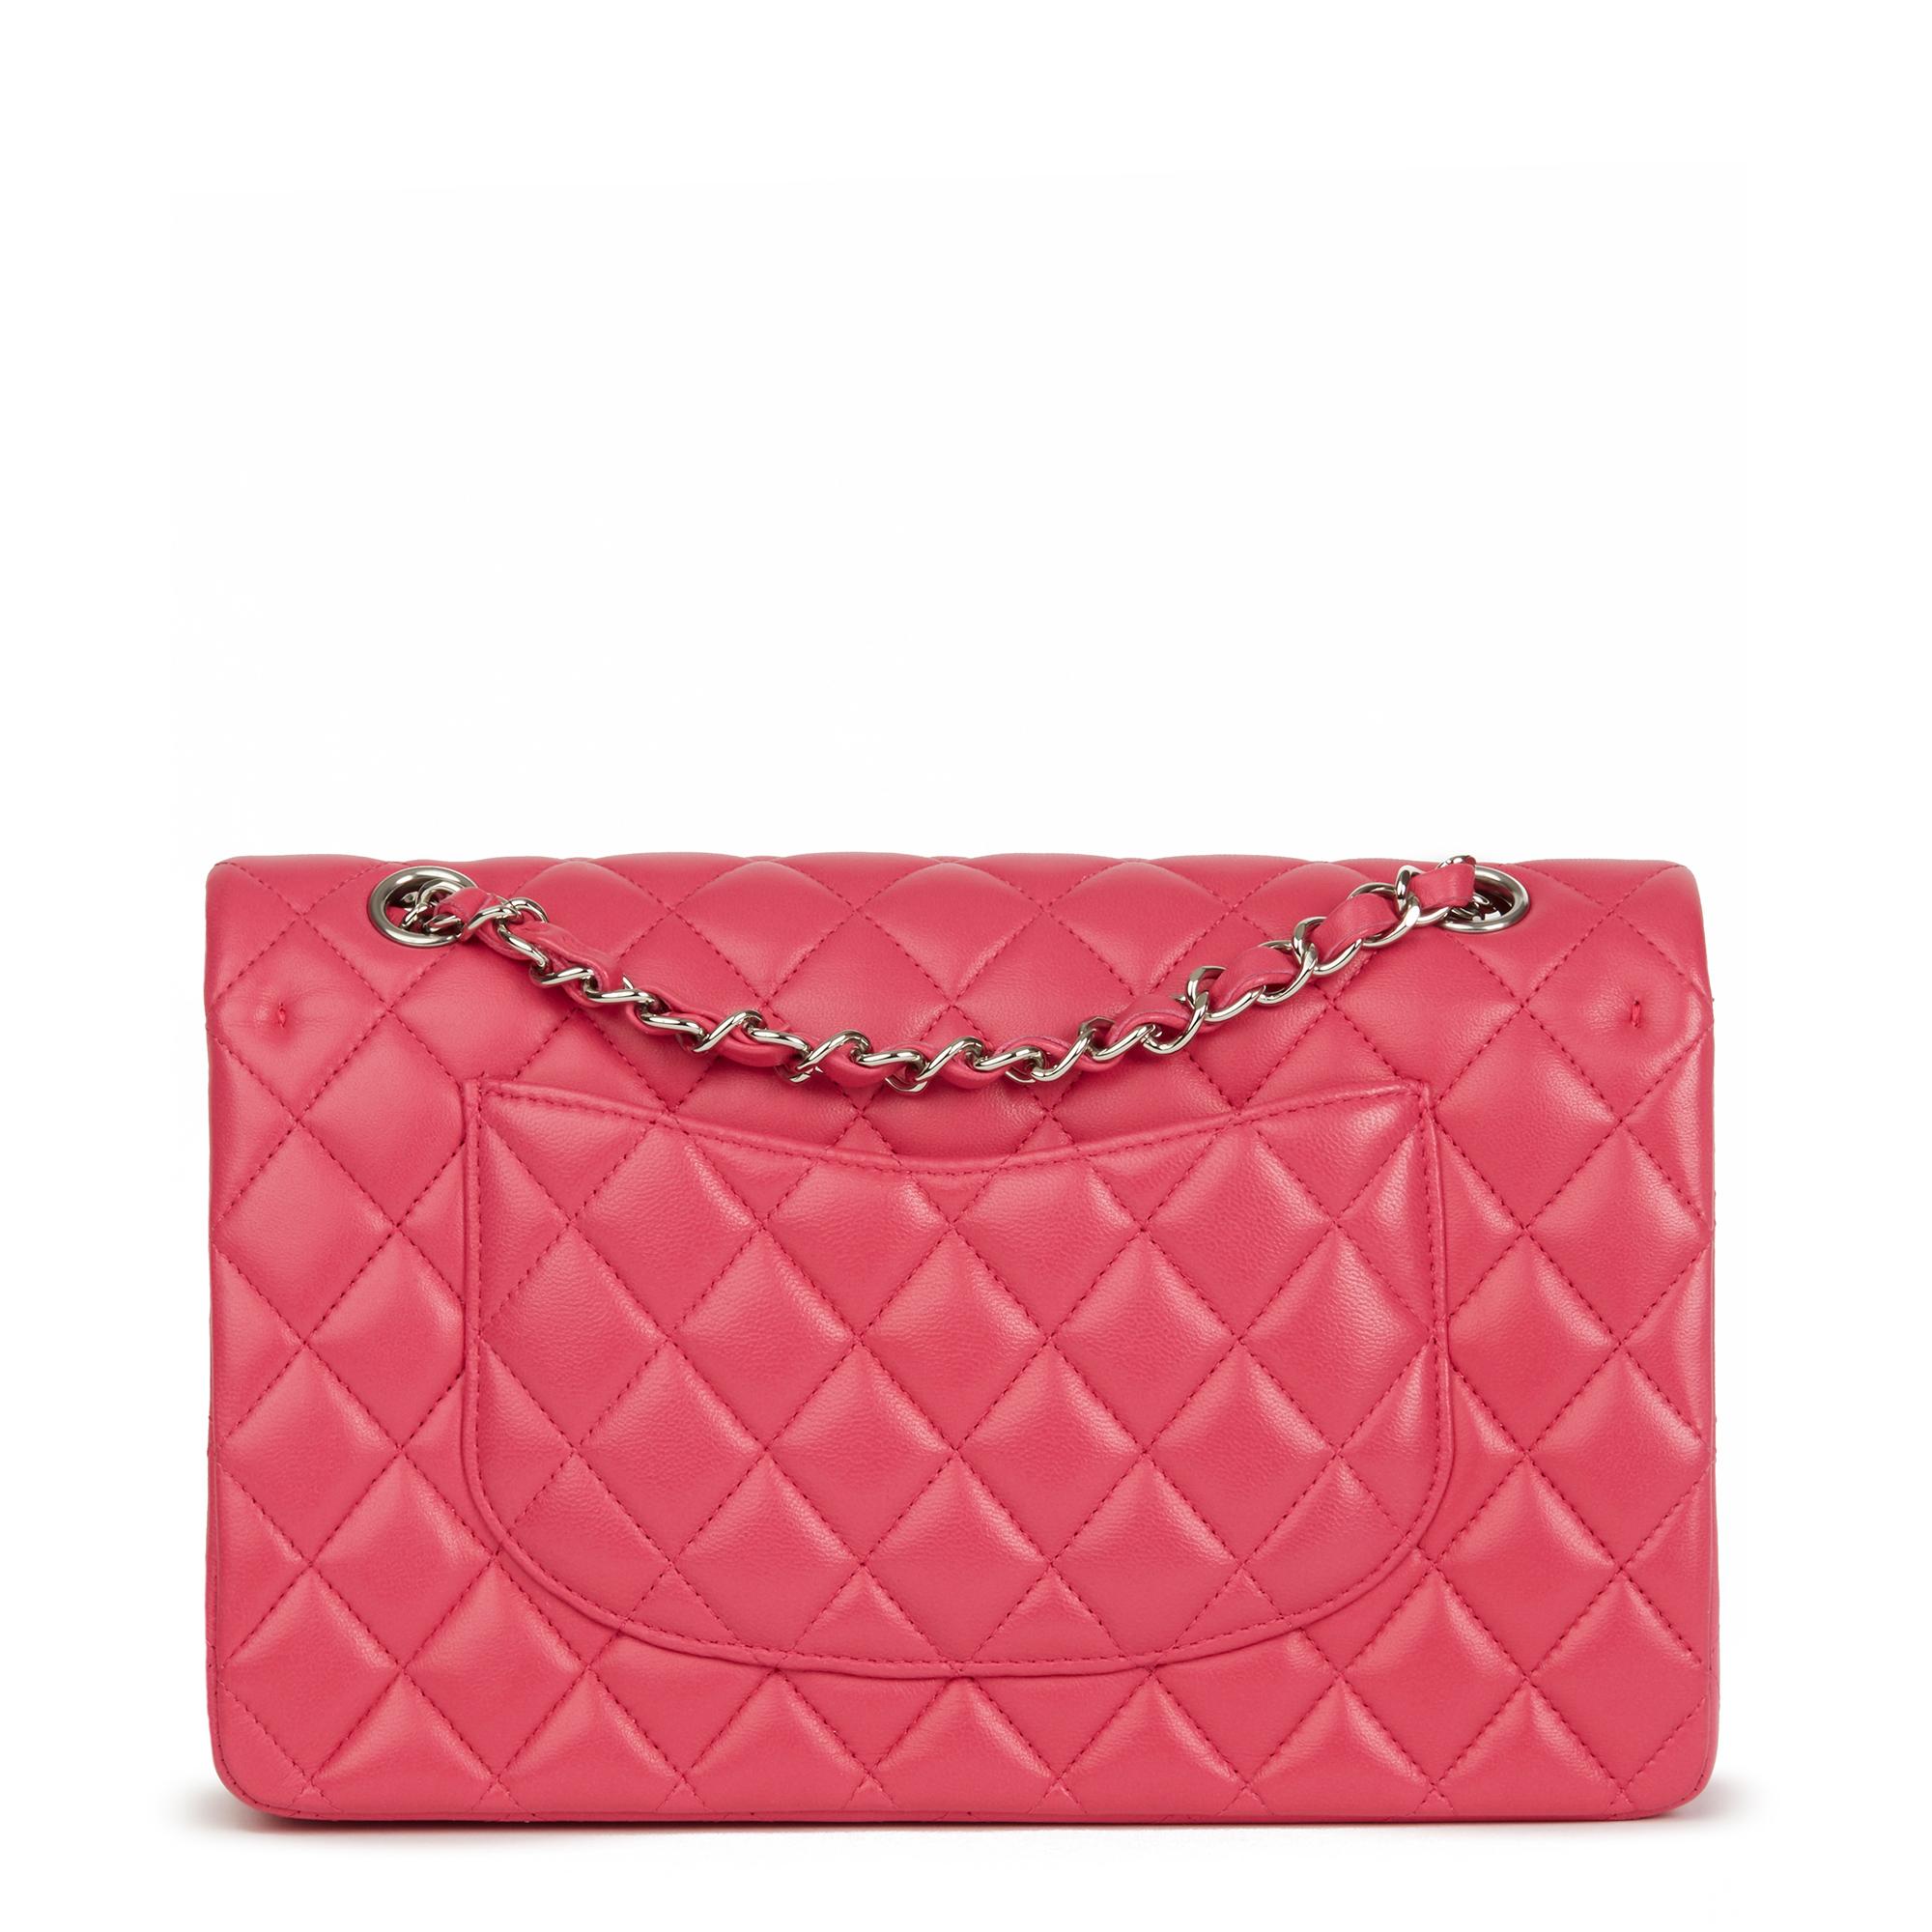 2014 Chanel Fuchsia Quilted Lambskin Medium Classic Double Flap Bag In Excellent Condition In Bishop's Stortford, Hertfordshire